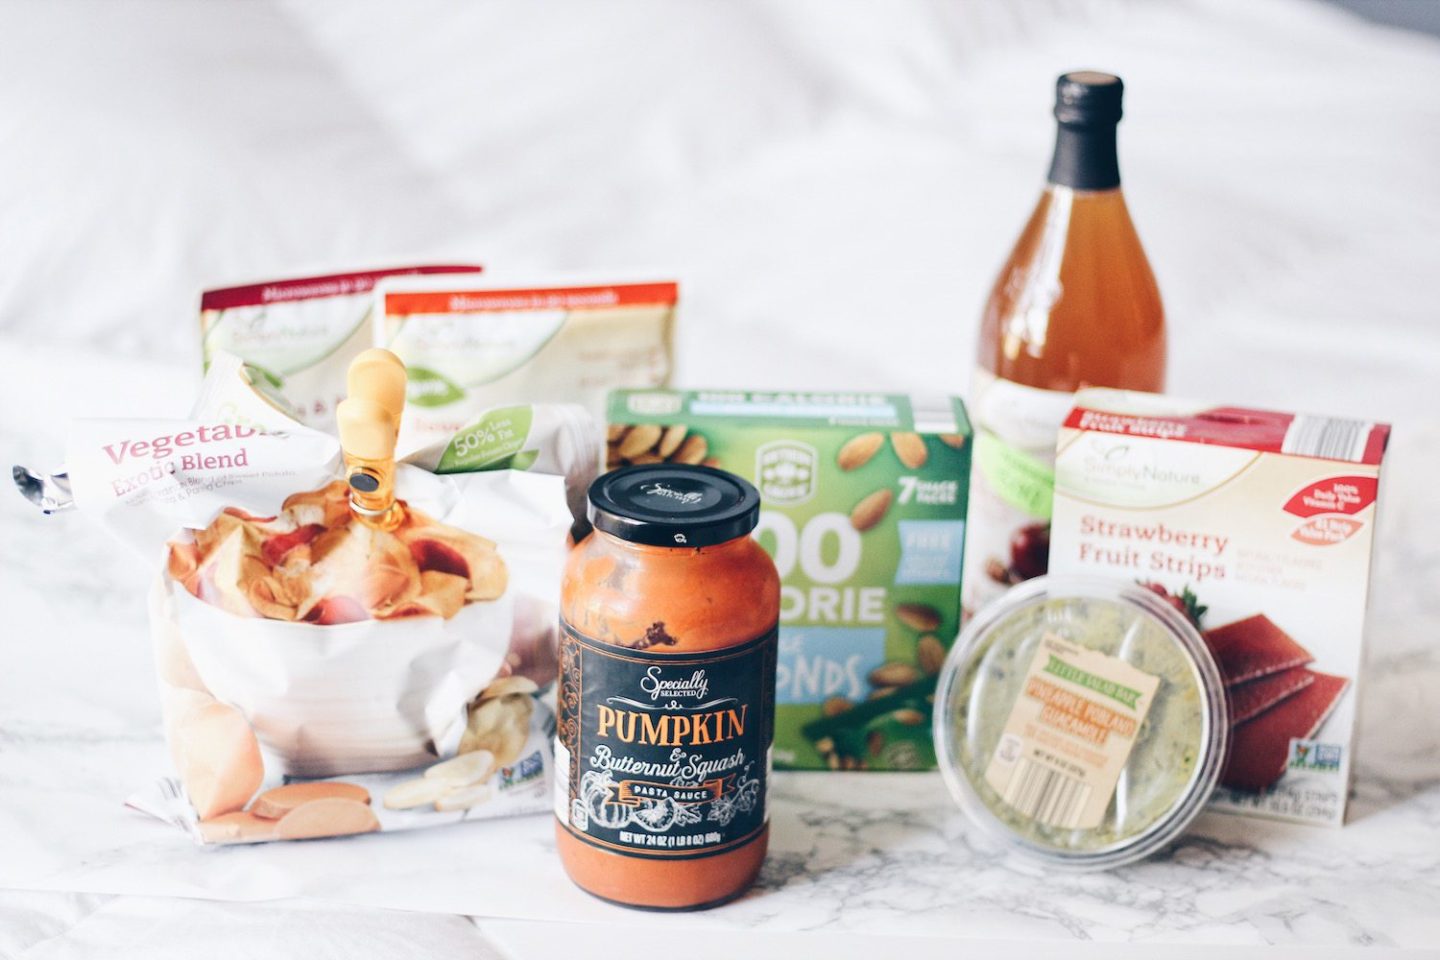 Check out these healthy and affordable snacks from Aldi!